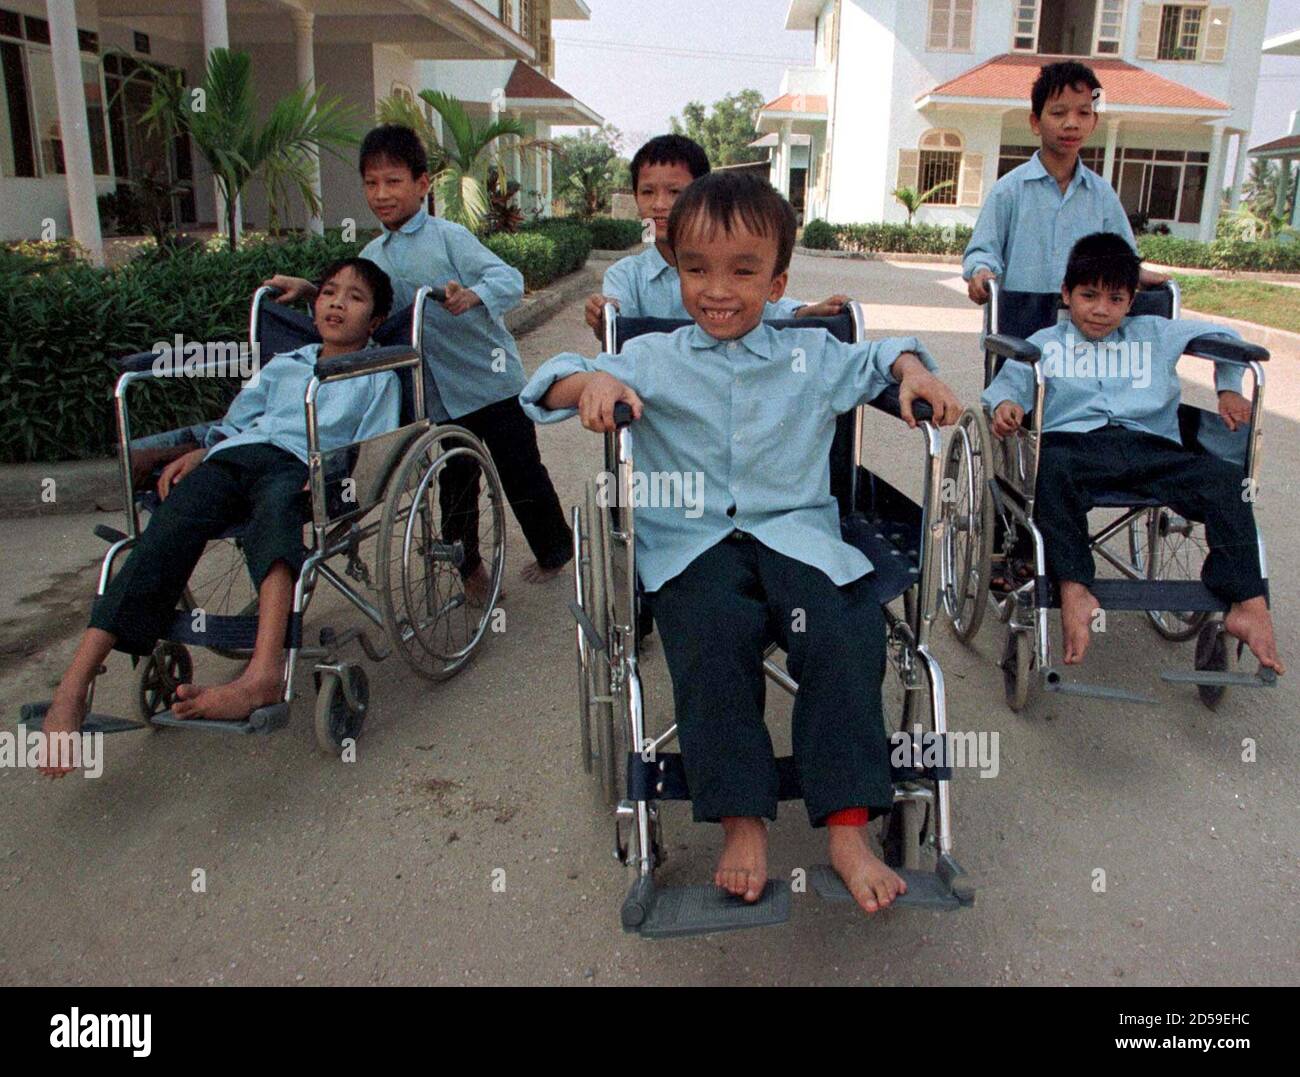 Vietnamese Children Who Doctors Say Are Suffering From Birth Defects Due To Their Parents Exposure To Chemical Defoliants During The Vietnam War Race Wheelchairs In The Grounds Of The Vietnam Friendship Village